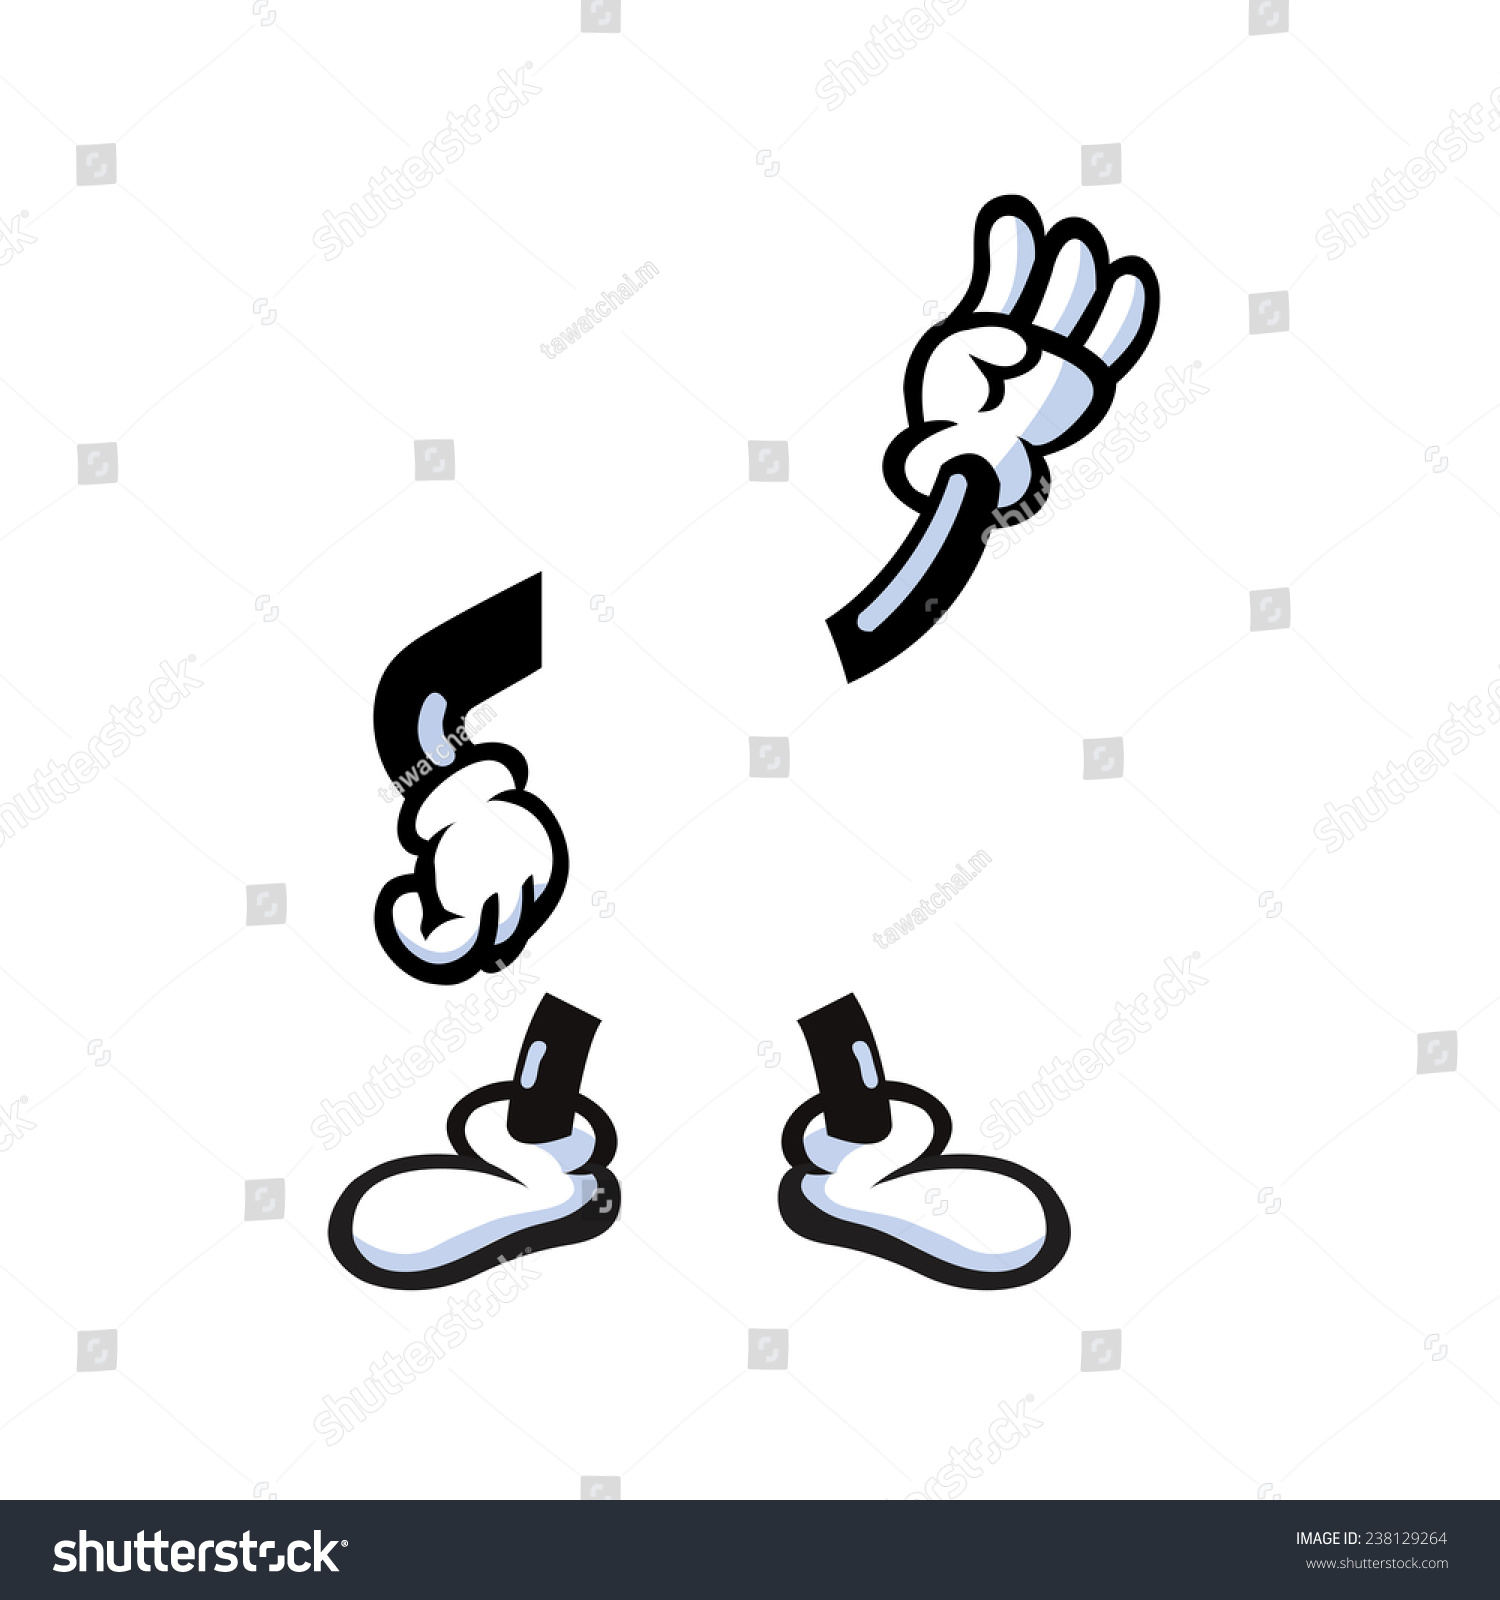 clipart arms and legs - photo #4